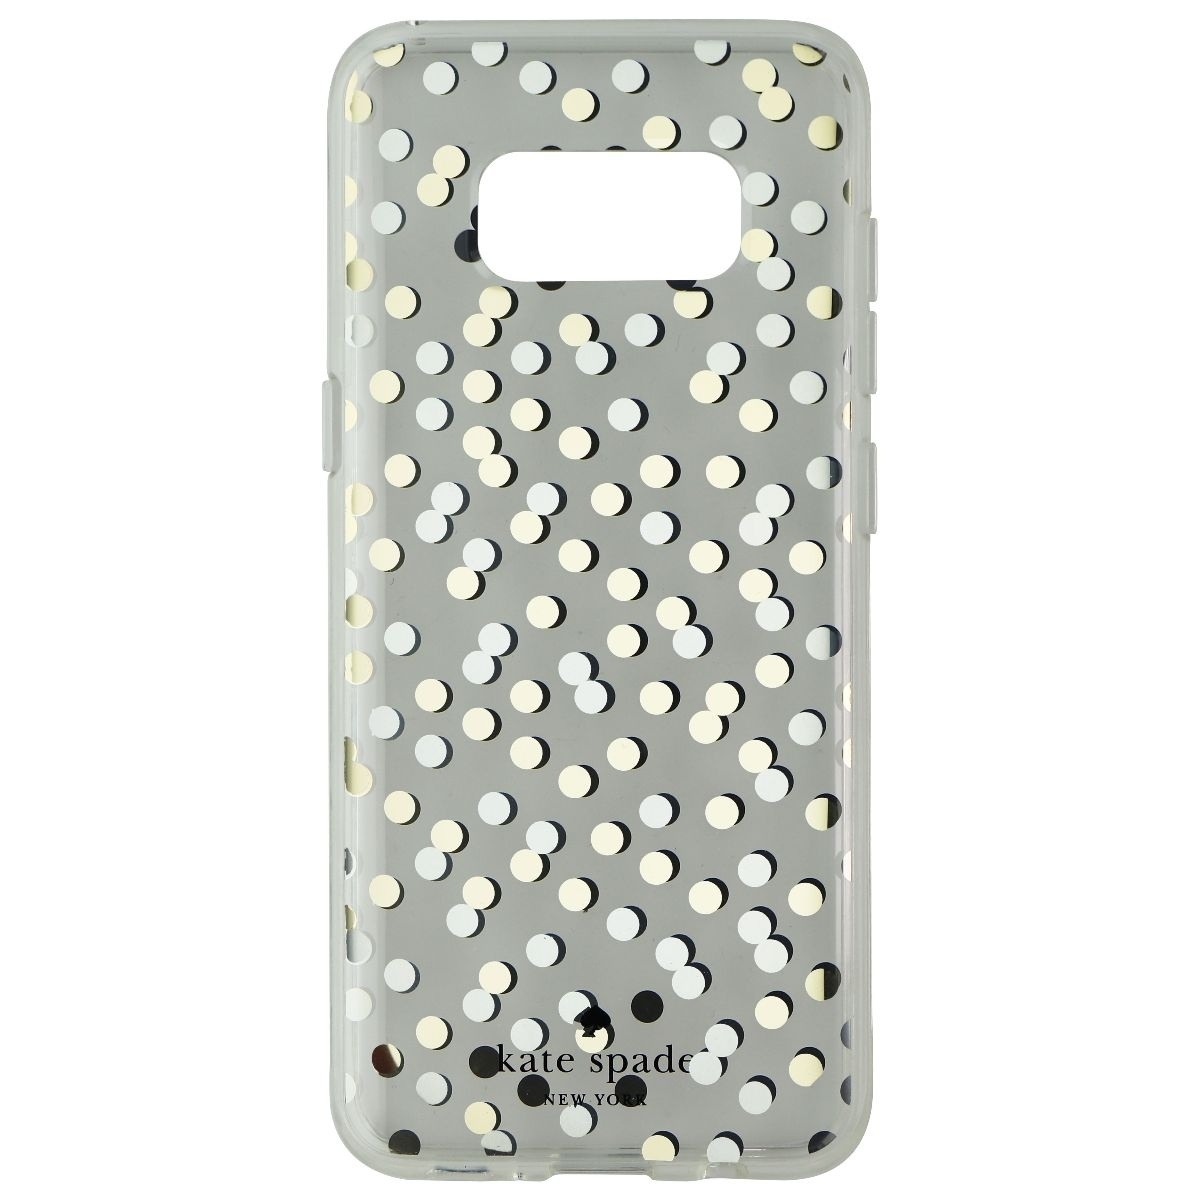 Kate Spade Hardshell Case For Galaxy S8 - Confetti Dot Clear/Gold/Silver